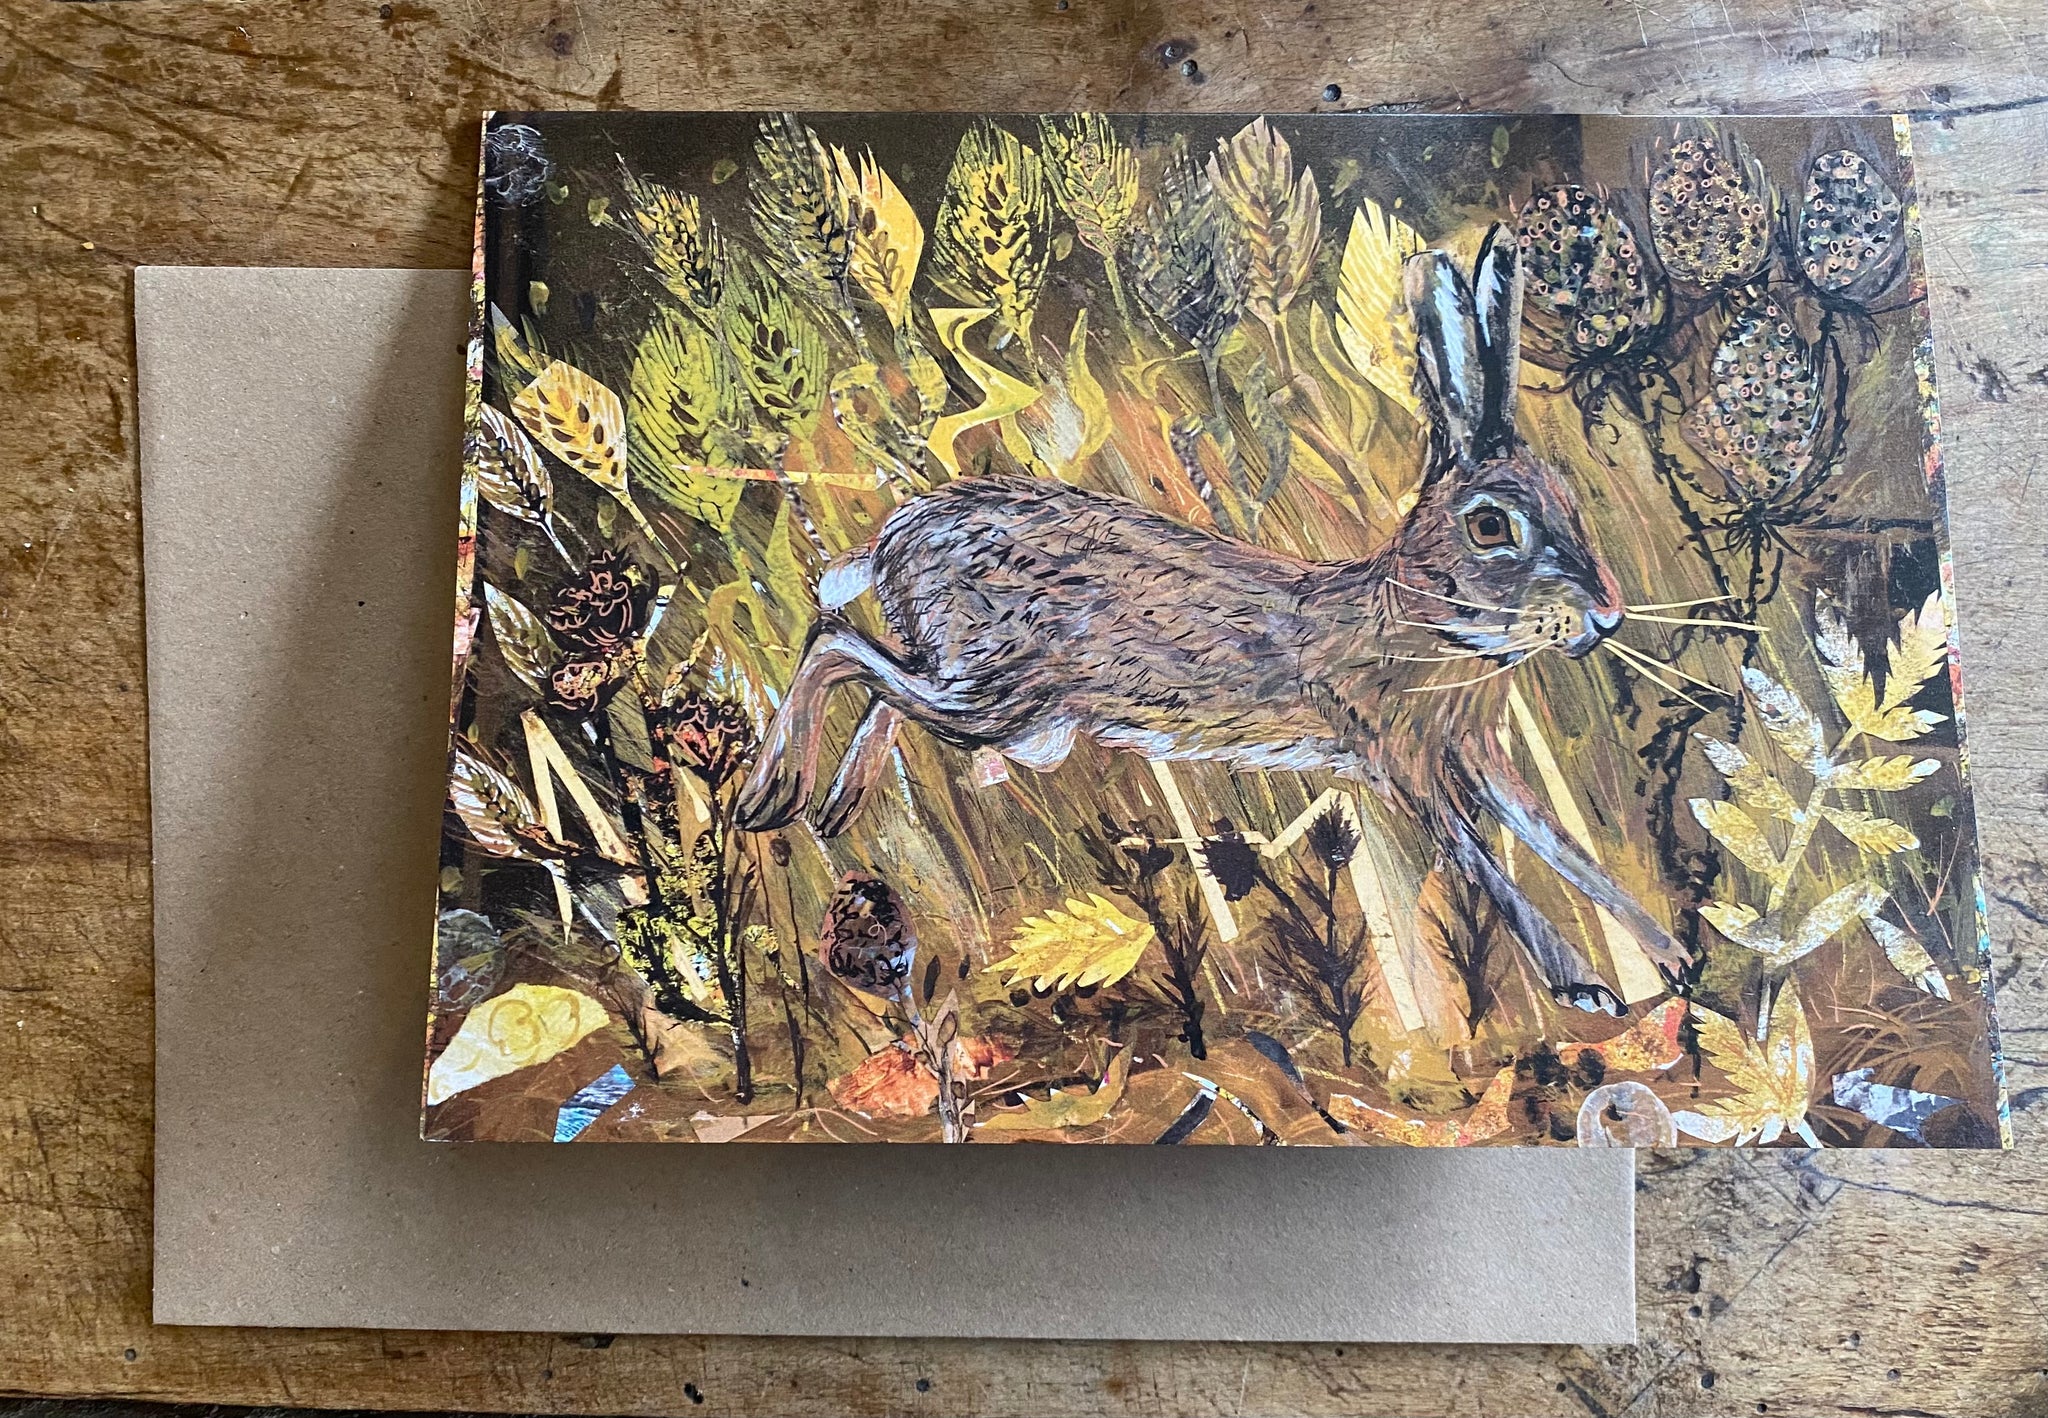 A5 Hare in the wheatfields -Blank Greeting Card